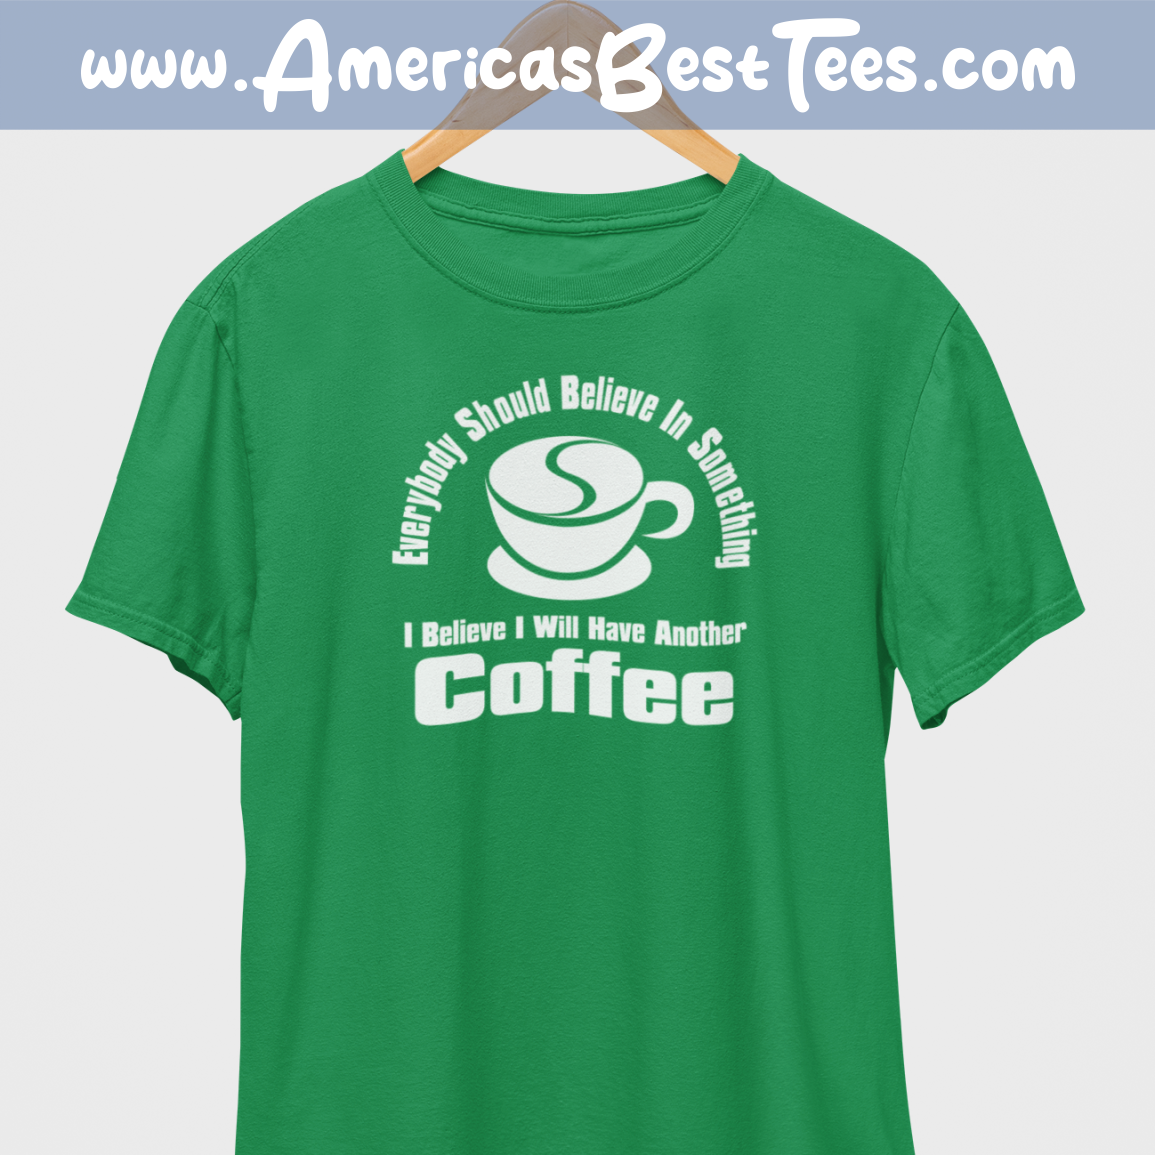 Everybody Should Believe Coffee White Print T-Shirt